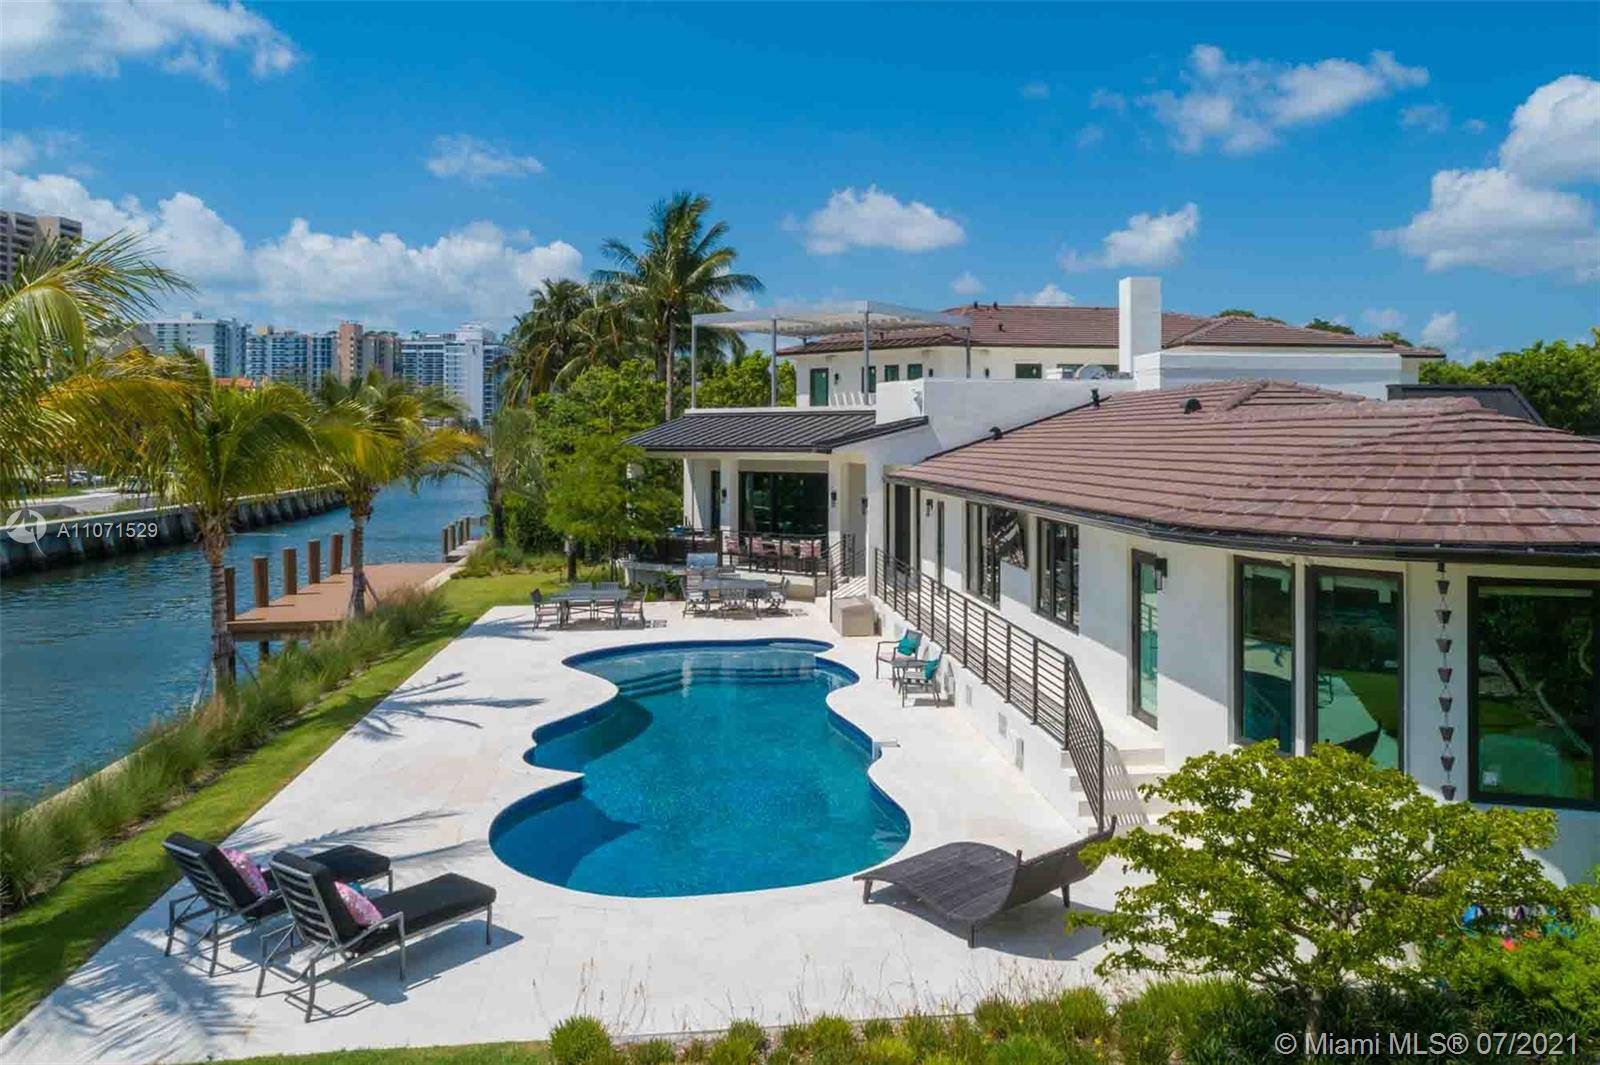 MIAMI BEACH DREAM HOME Enjoy proximity to the beach and boardwalk only 6 min walk as well as many great restaurants at Faena, Edition, 1 Hotel, SoHo House and more.